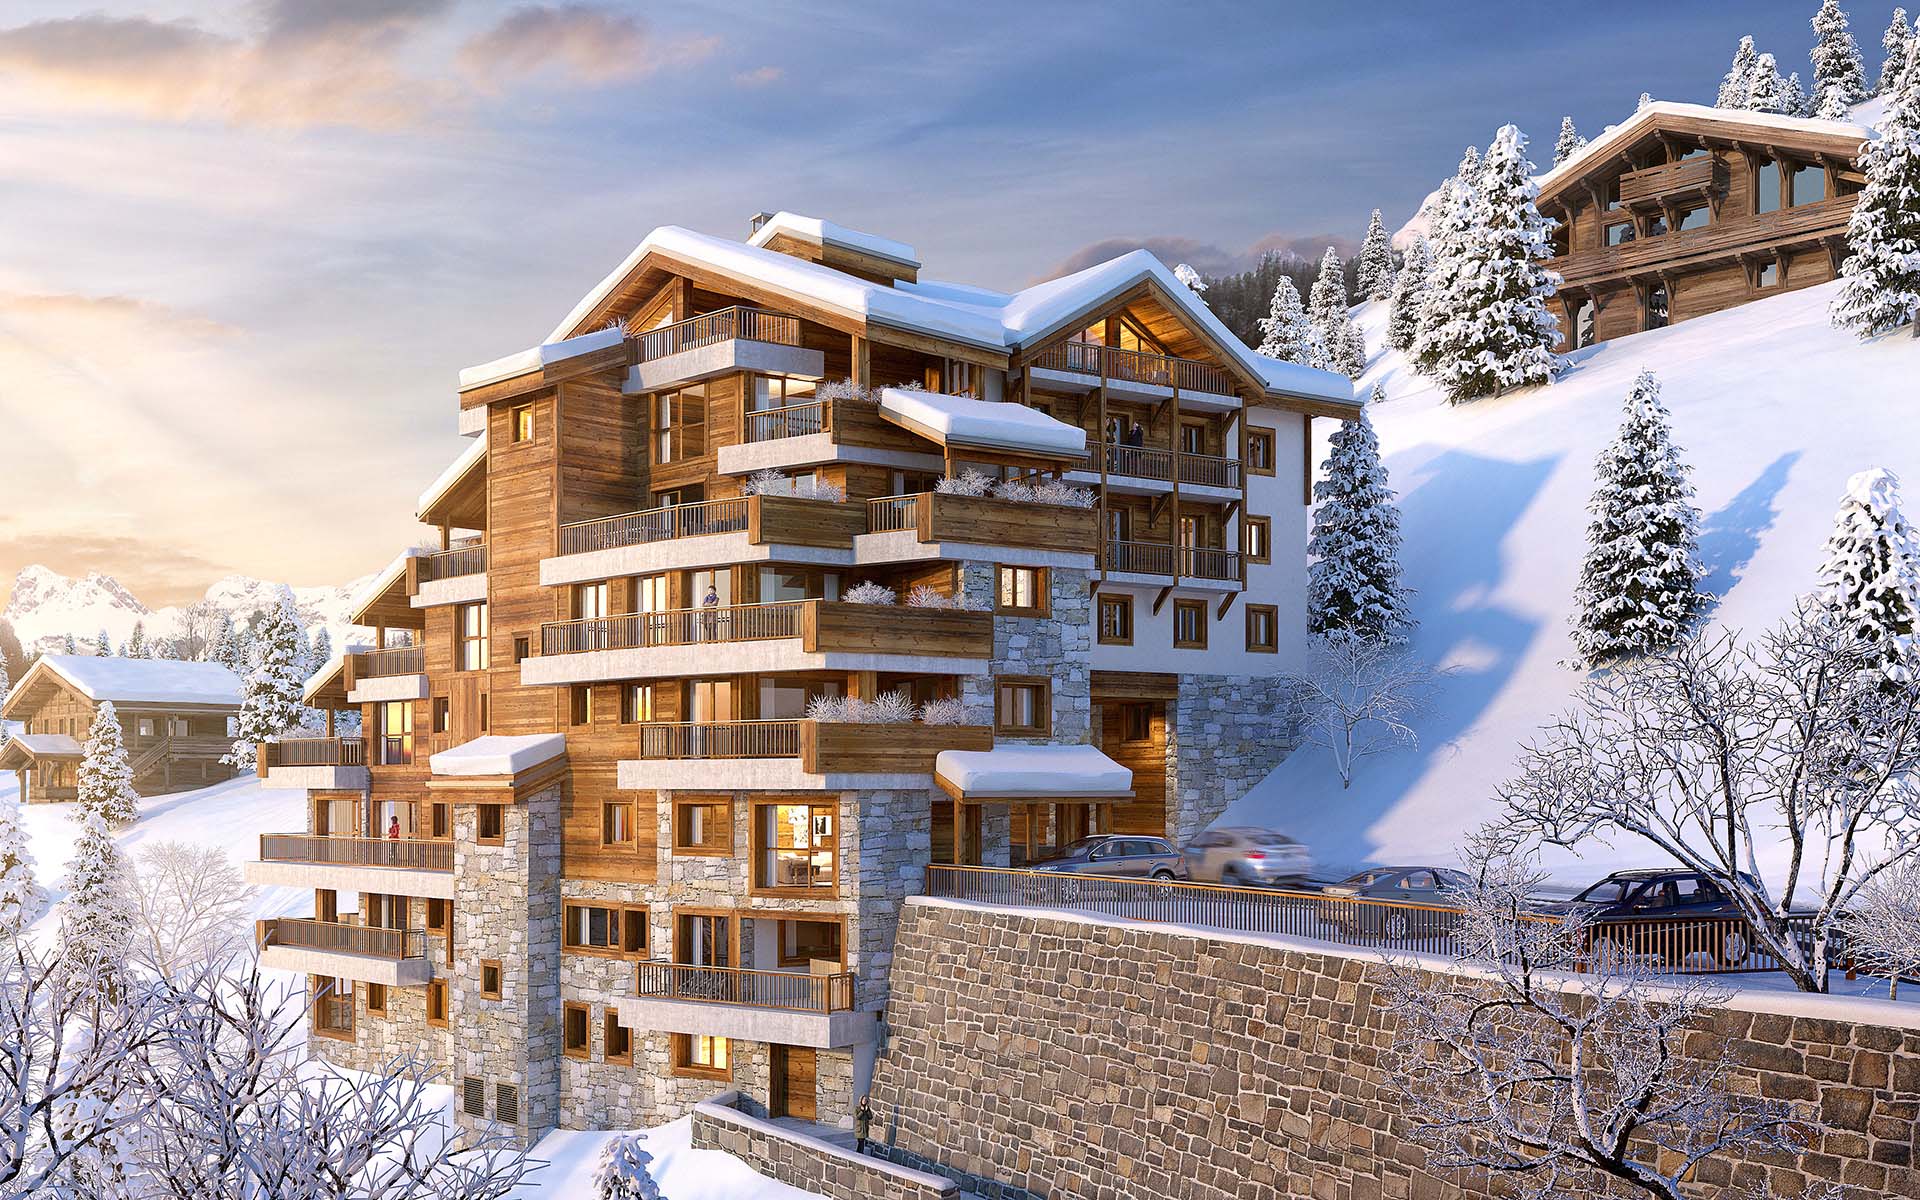 Real estate project of a luxurious chalet represented by a 3D perspective of the place.